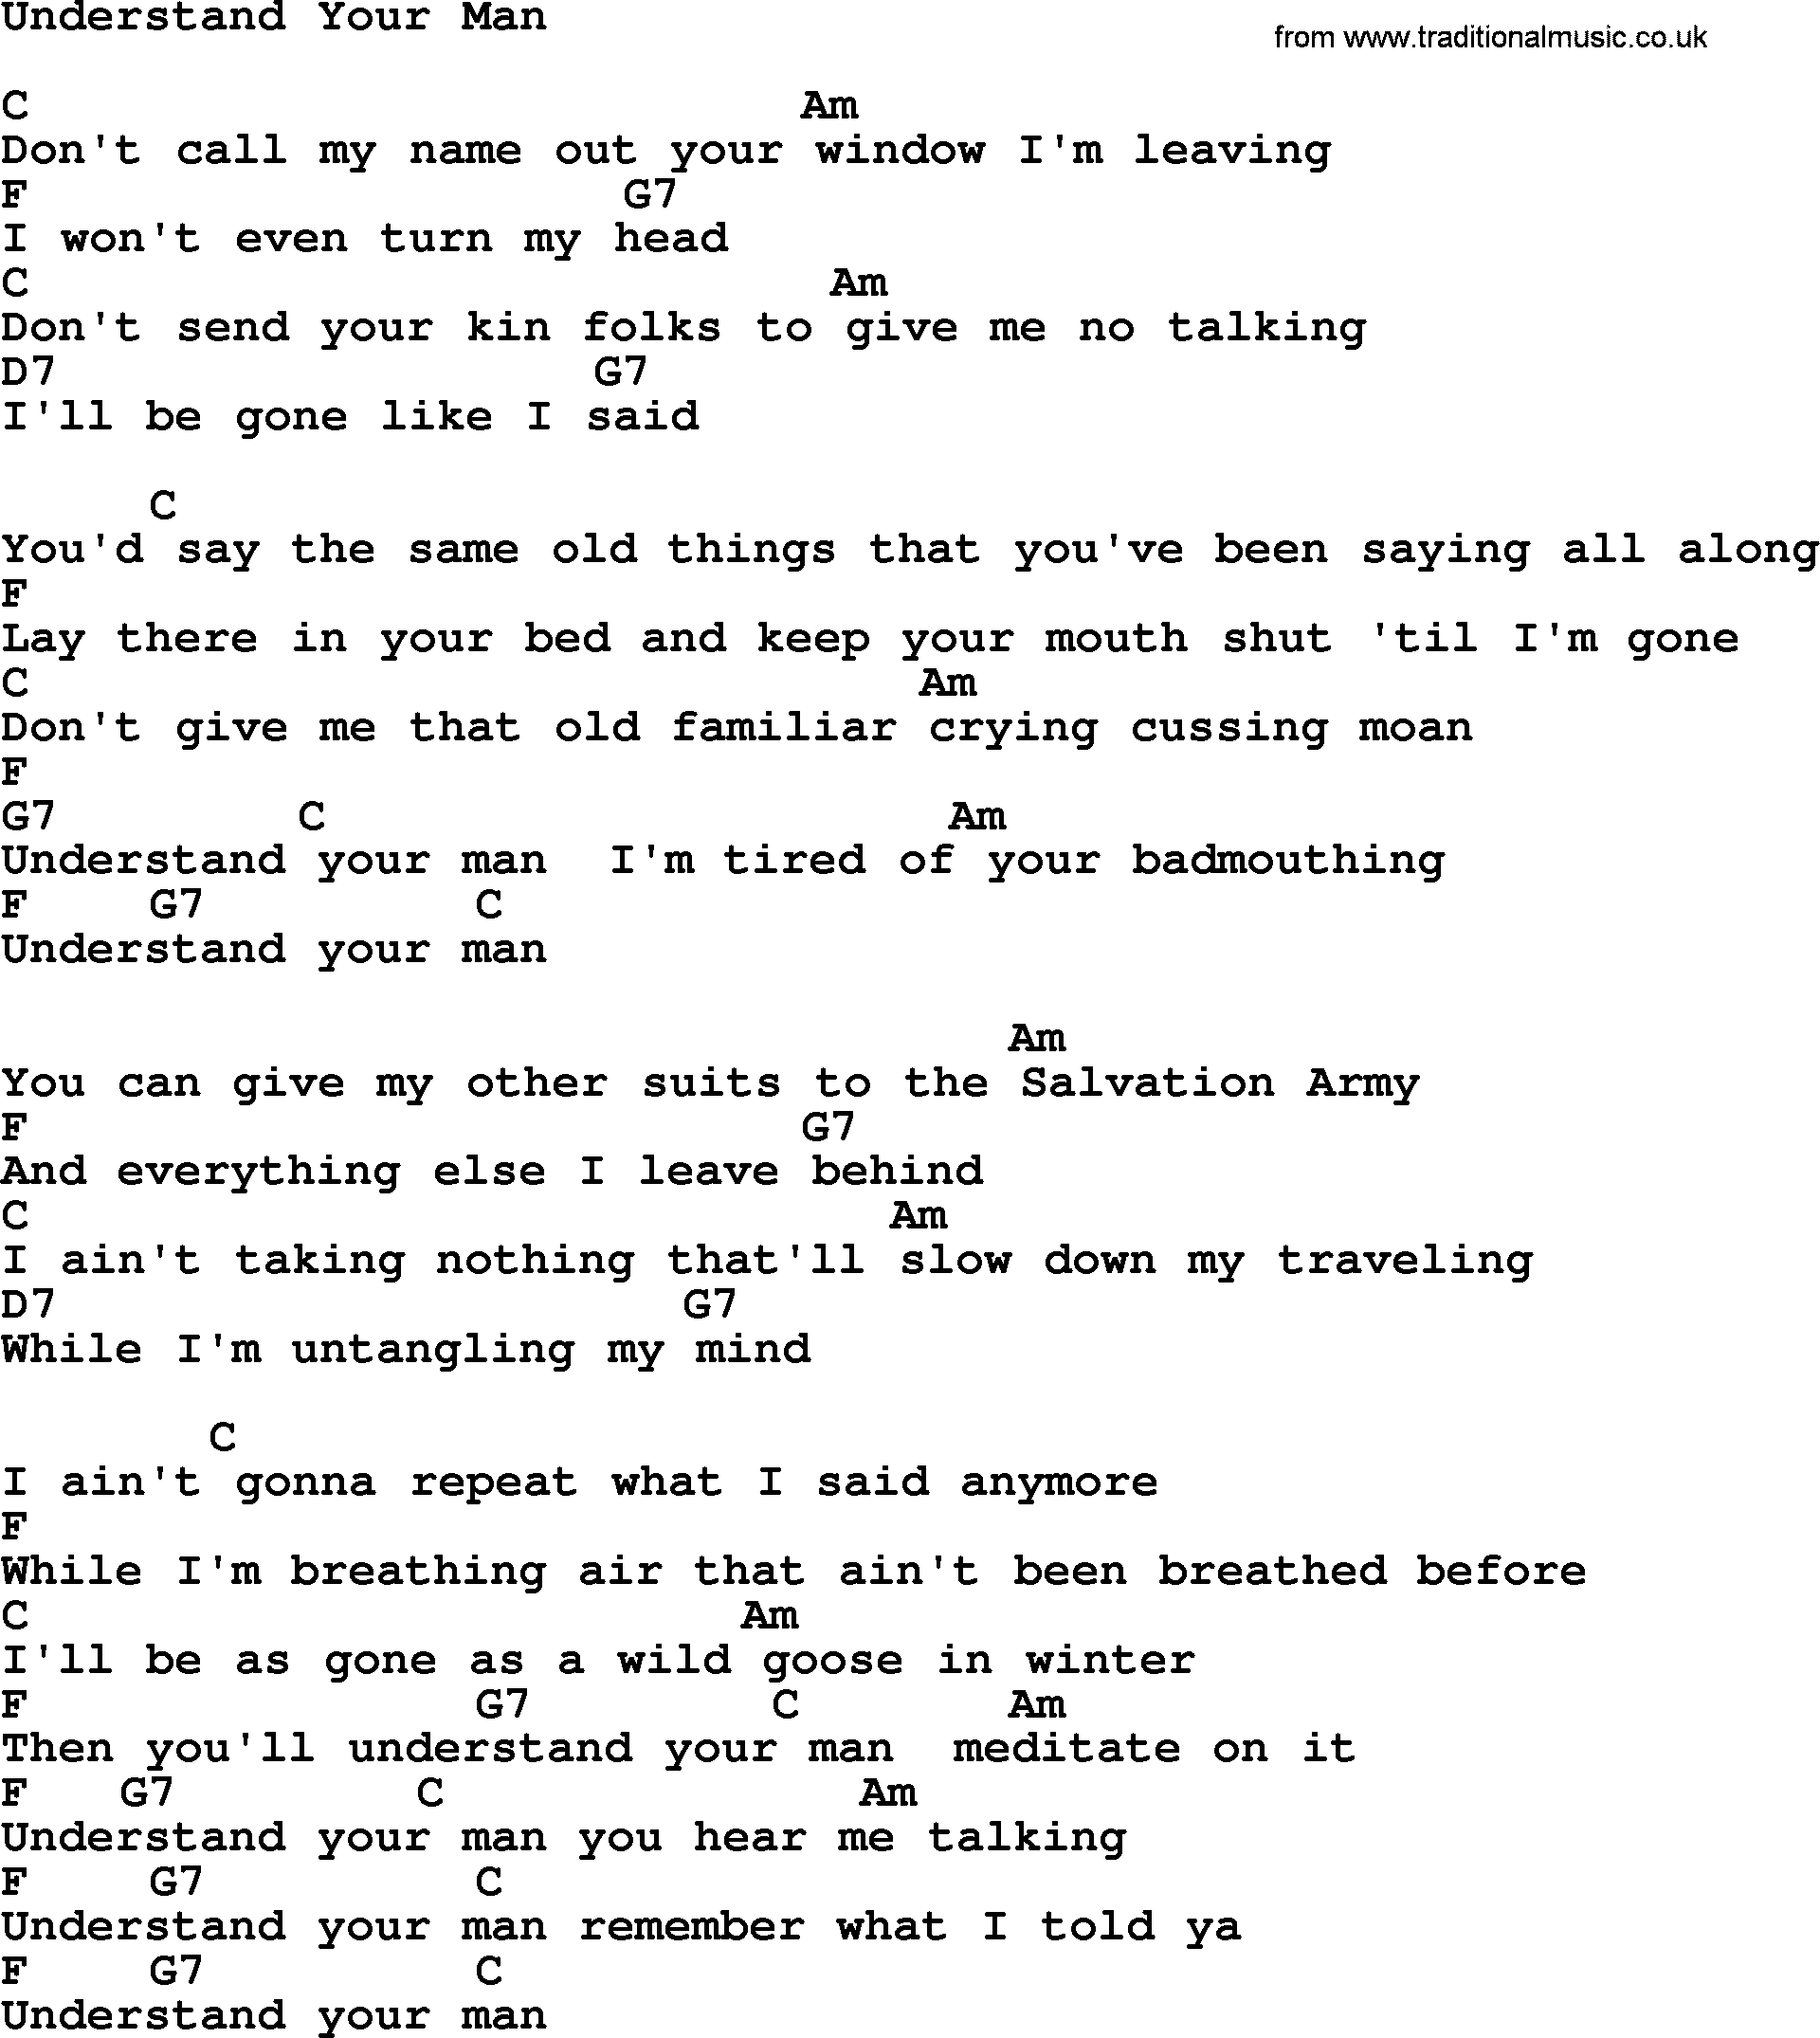 Johnny Cash song Understand Your Man, lyrics and chords